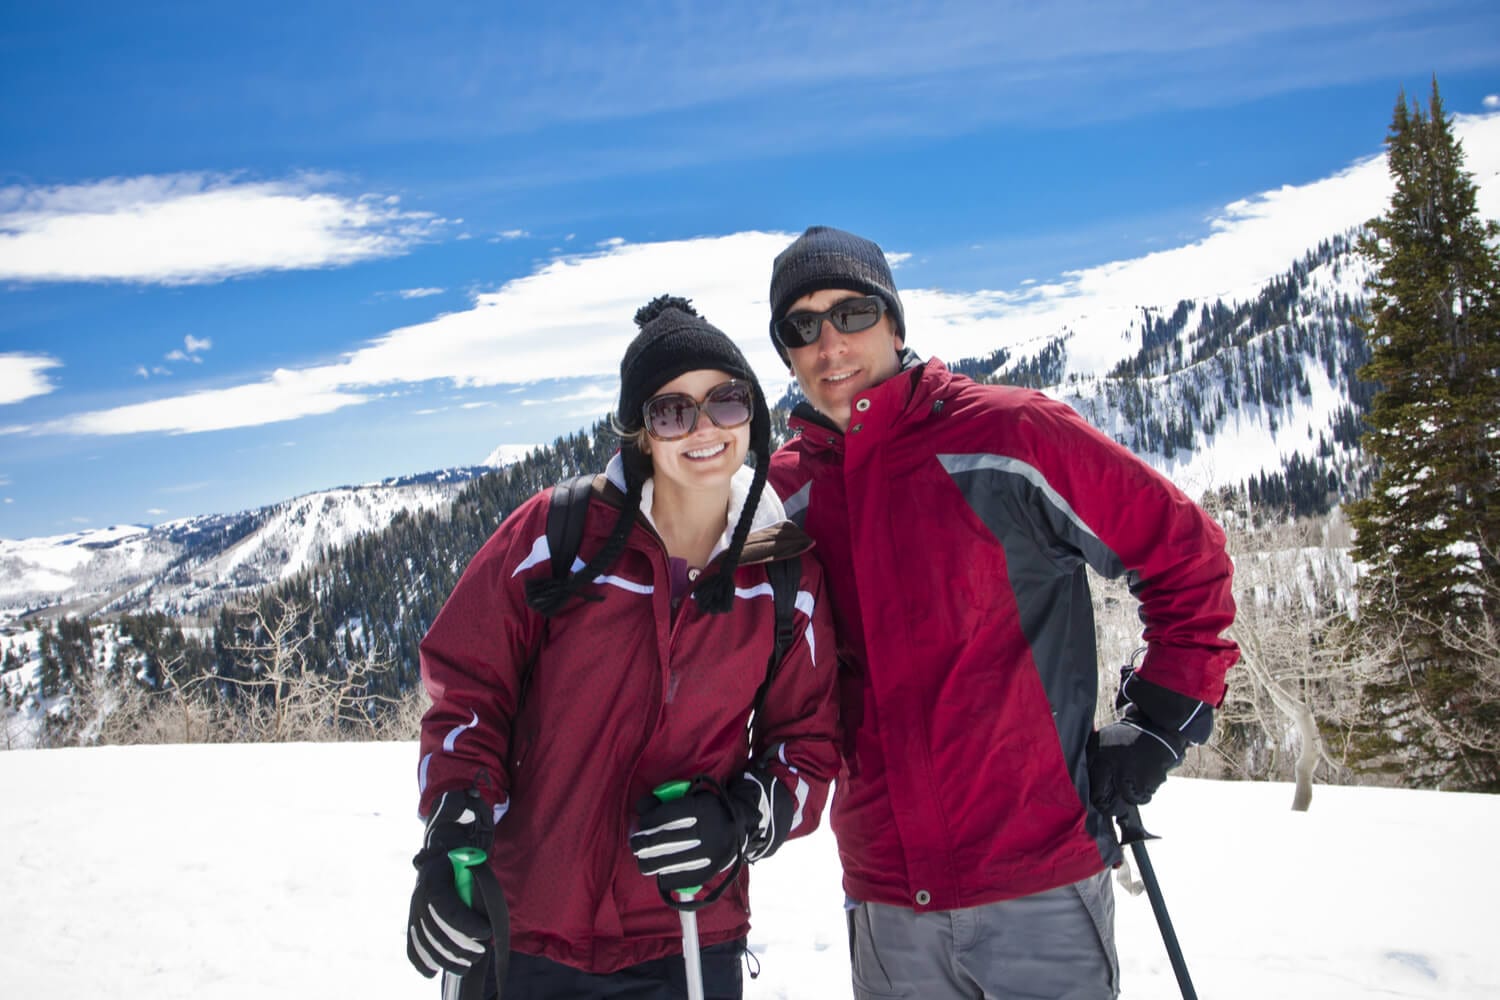 A outdoor enthusiast couple happily avoids crowds while skiing in Colorado.